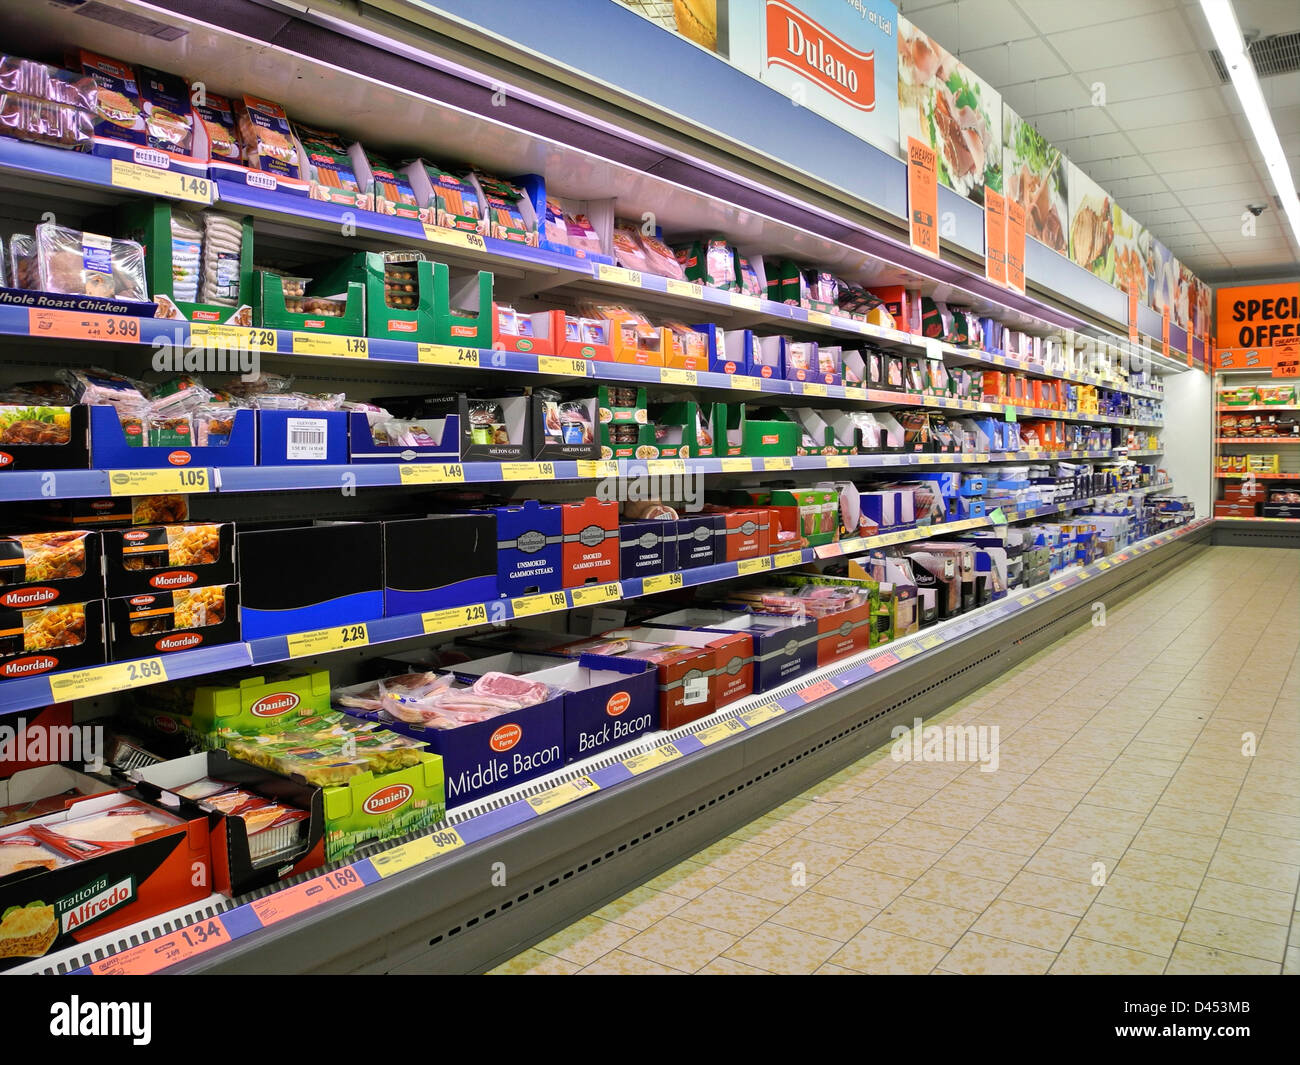 Inside a Lidl store supermarket interior Stock Photo